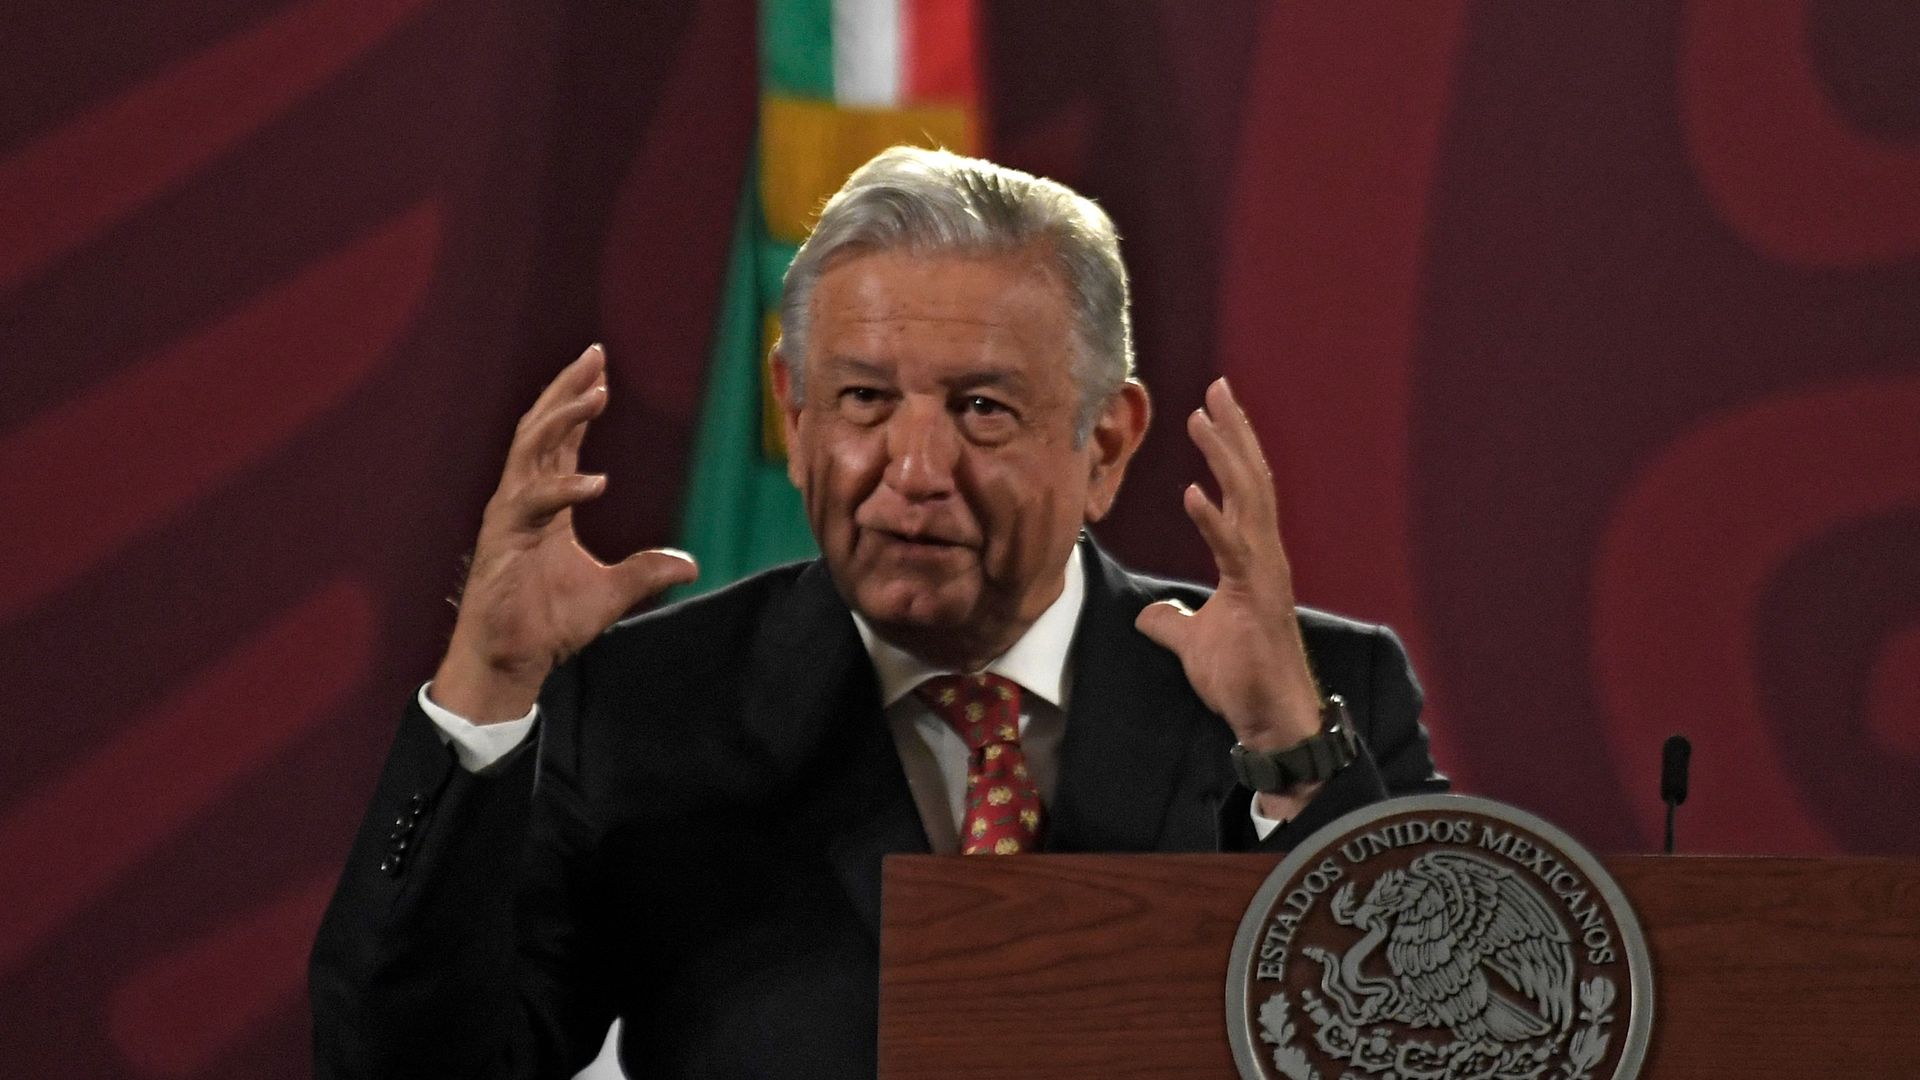 Mexico's President Andres Manuel Lopez Obrador speaks during his daily morning press conference in Mexico City on June 6, 2022.